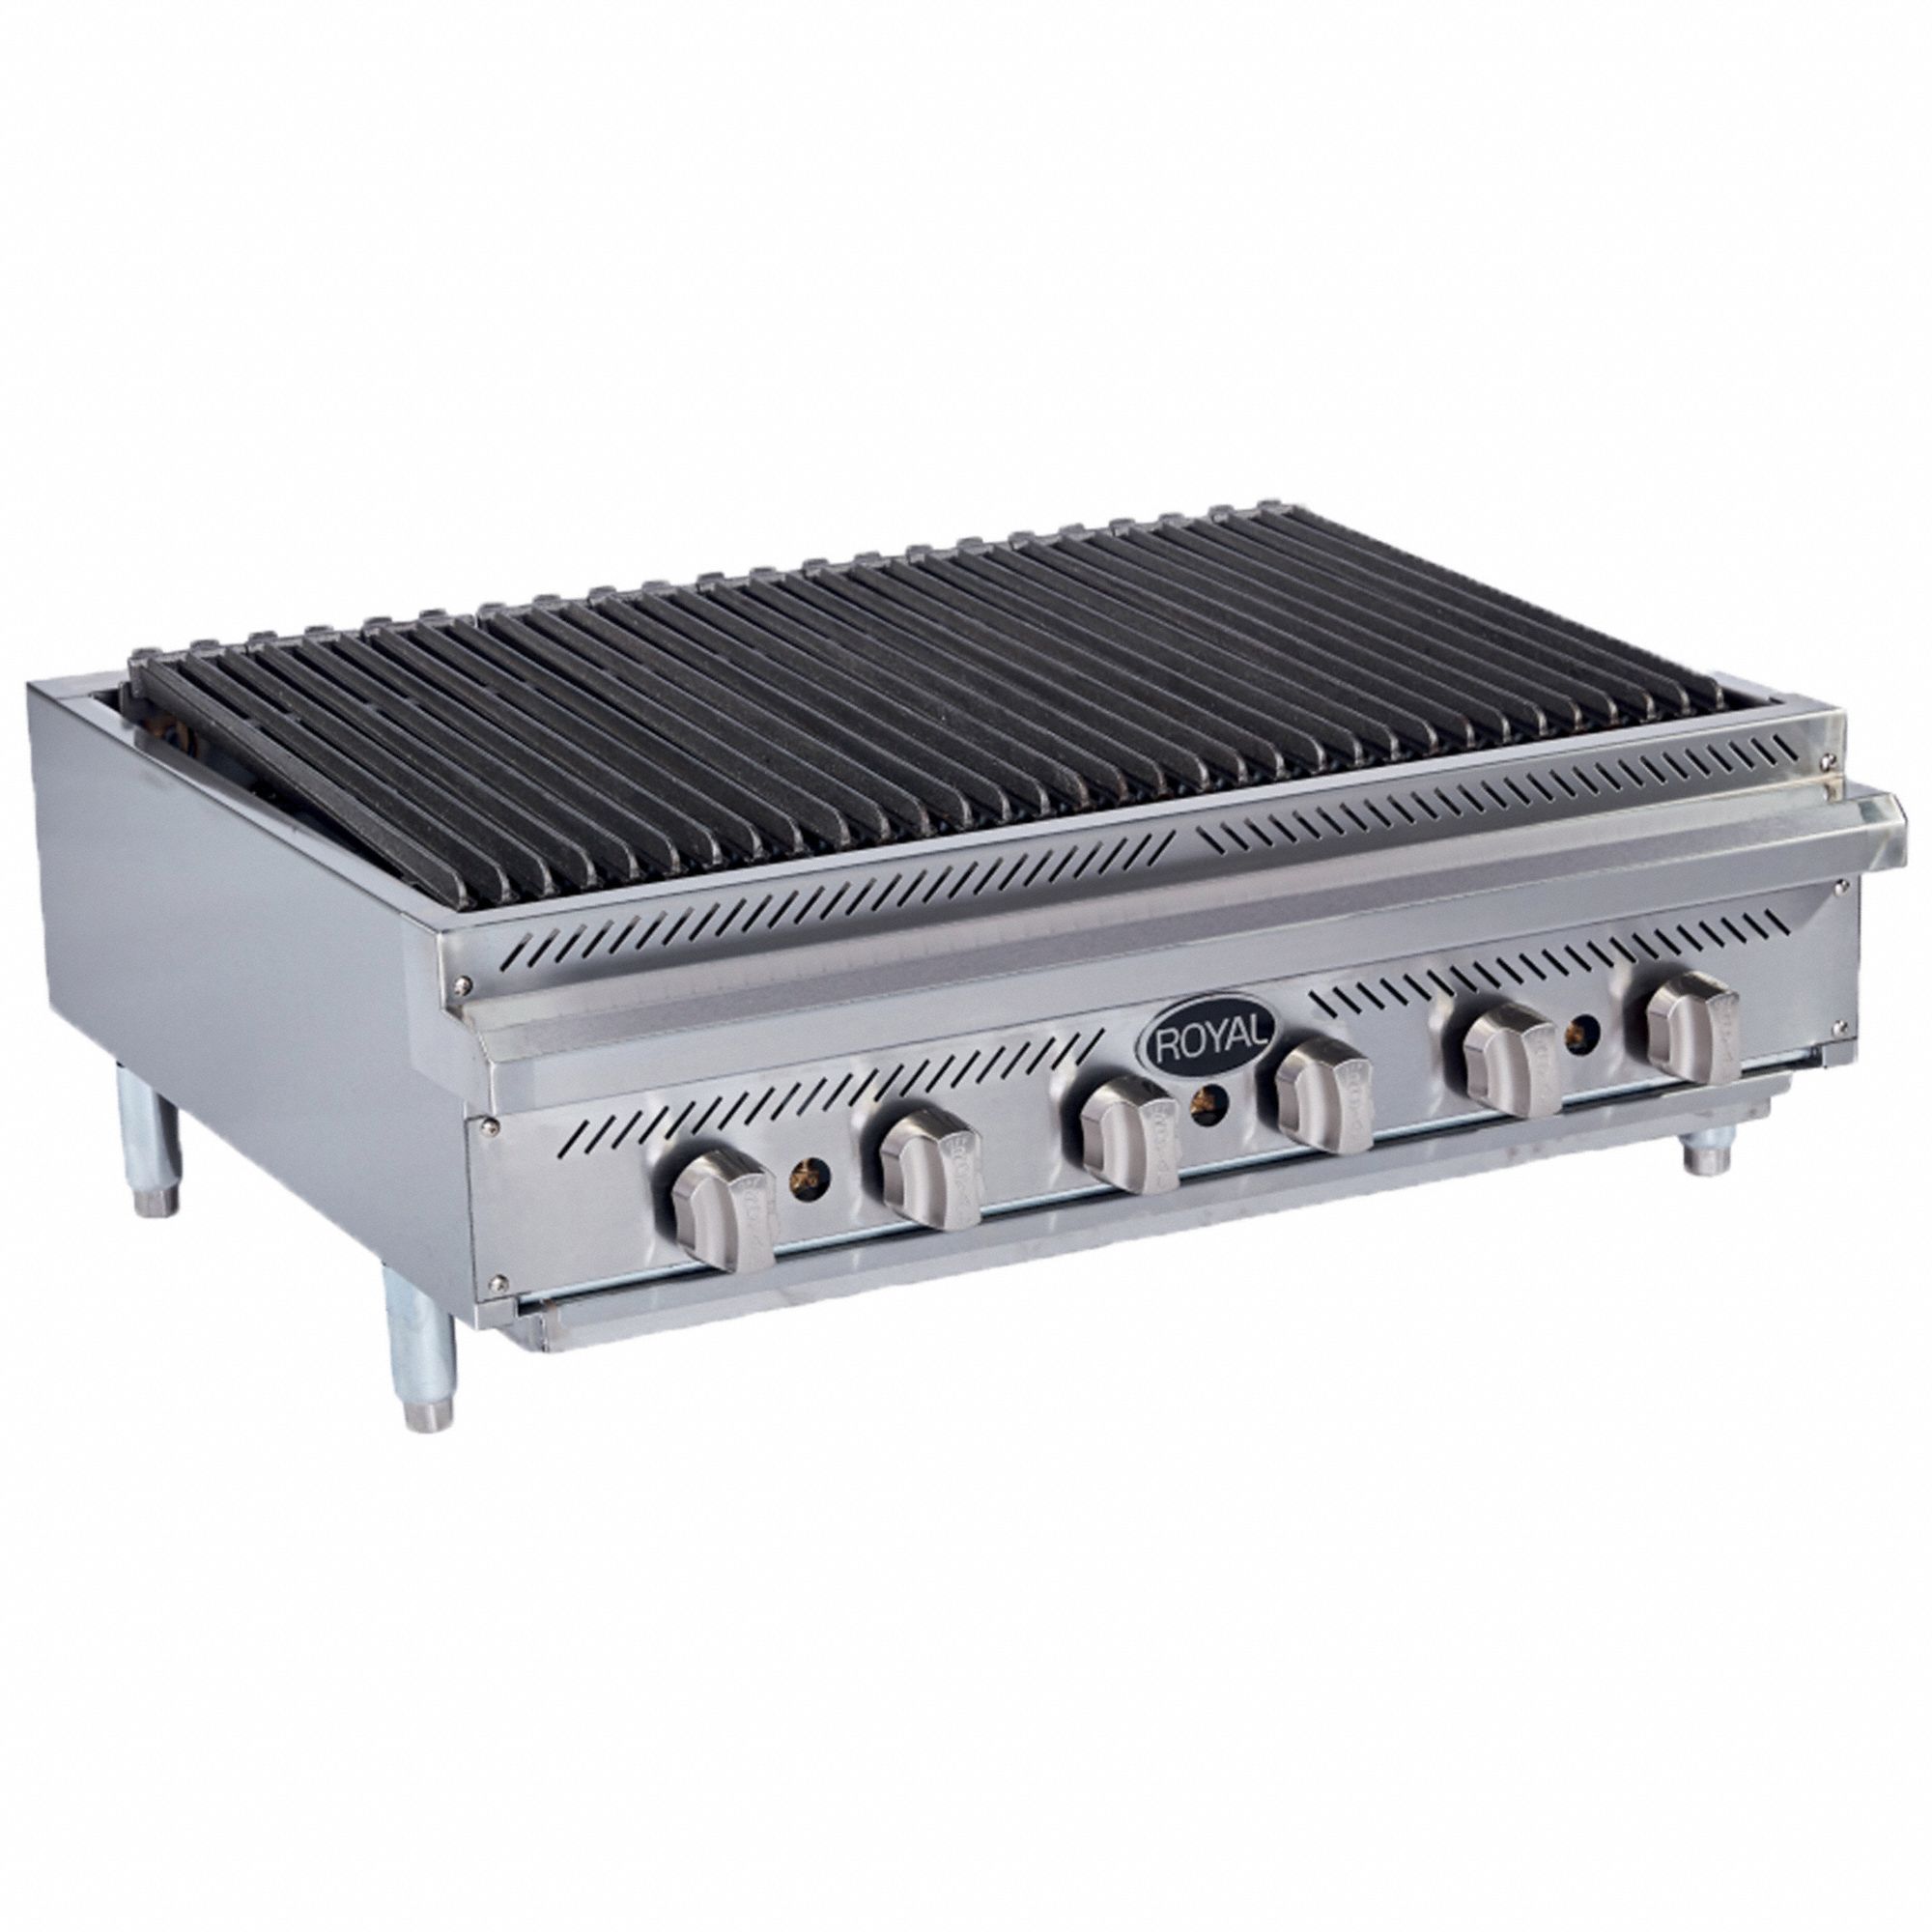 Countertop Radiant Broiler: Gas, 30 in x 30 1/2 in Cooking Surface